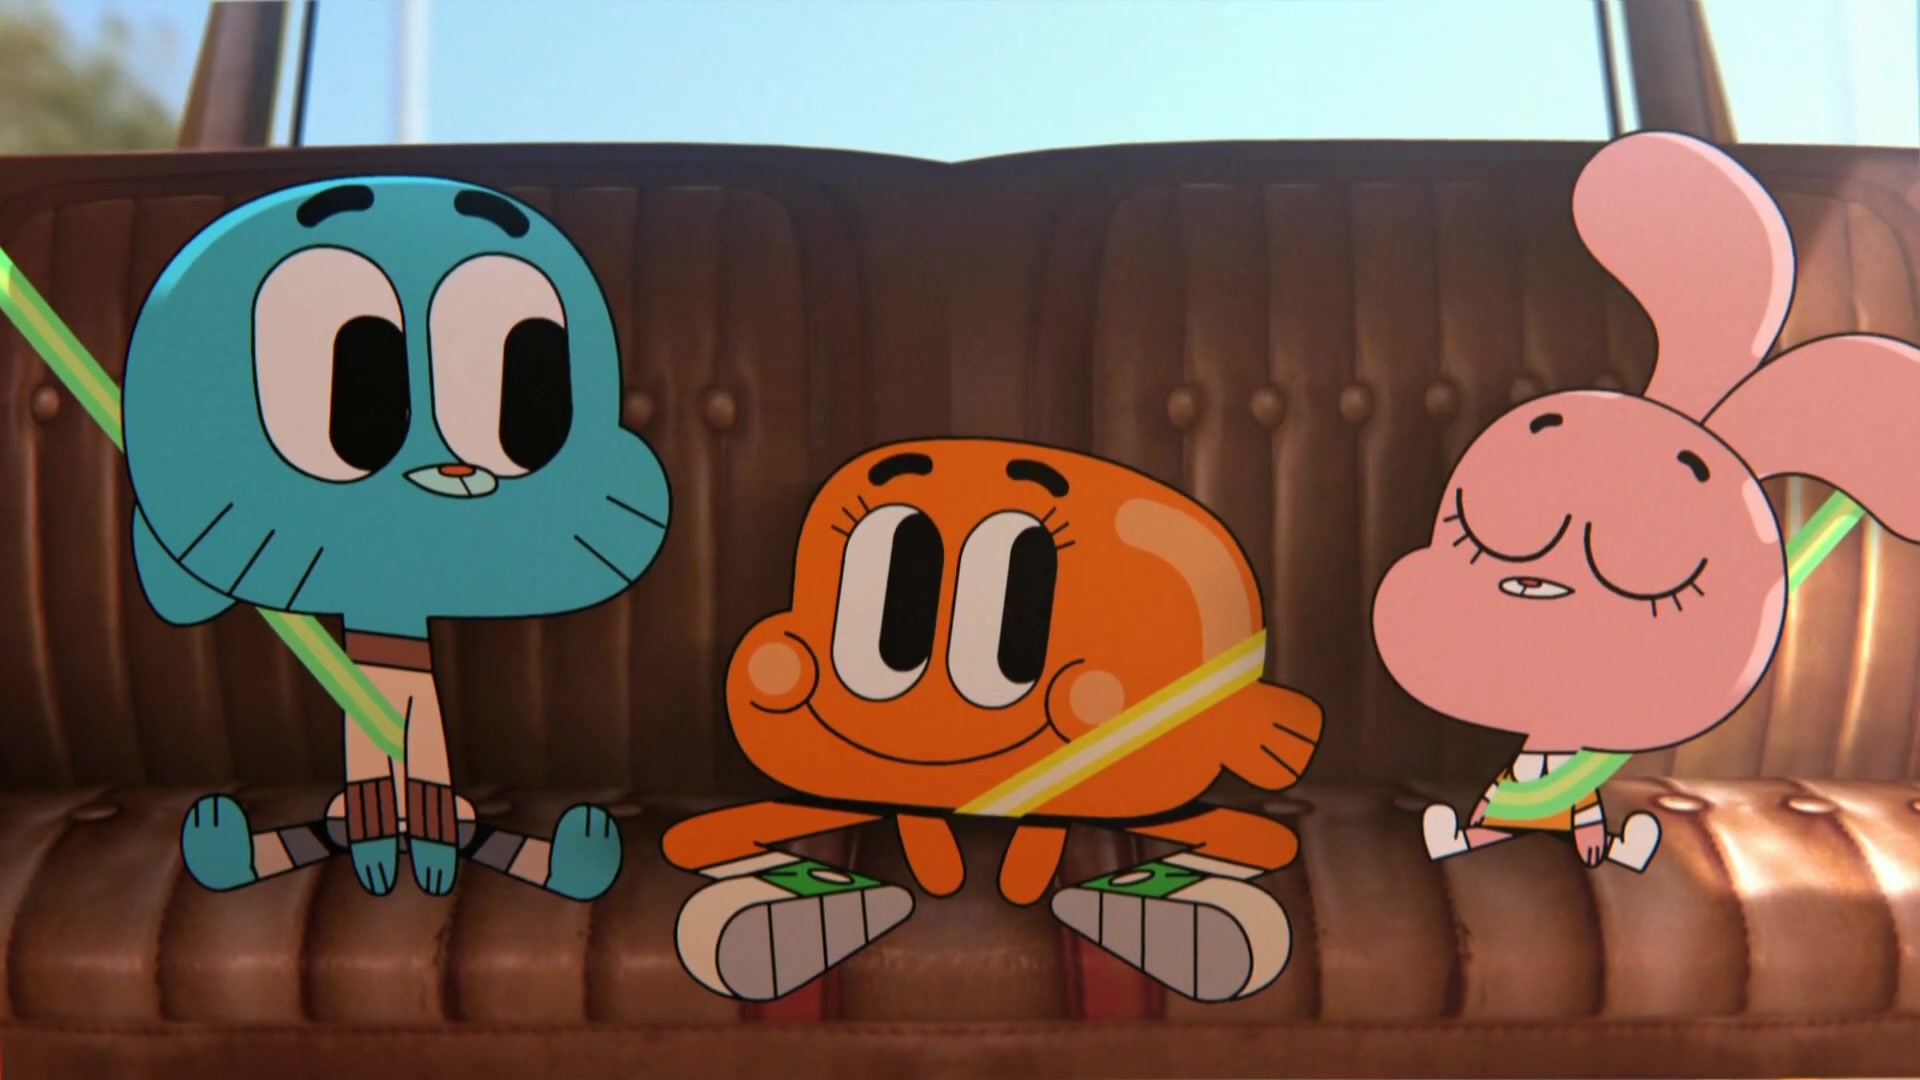 Gumball Screens on Twitter: 